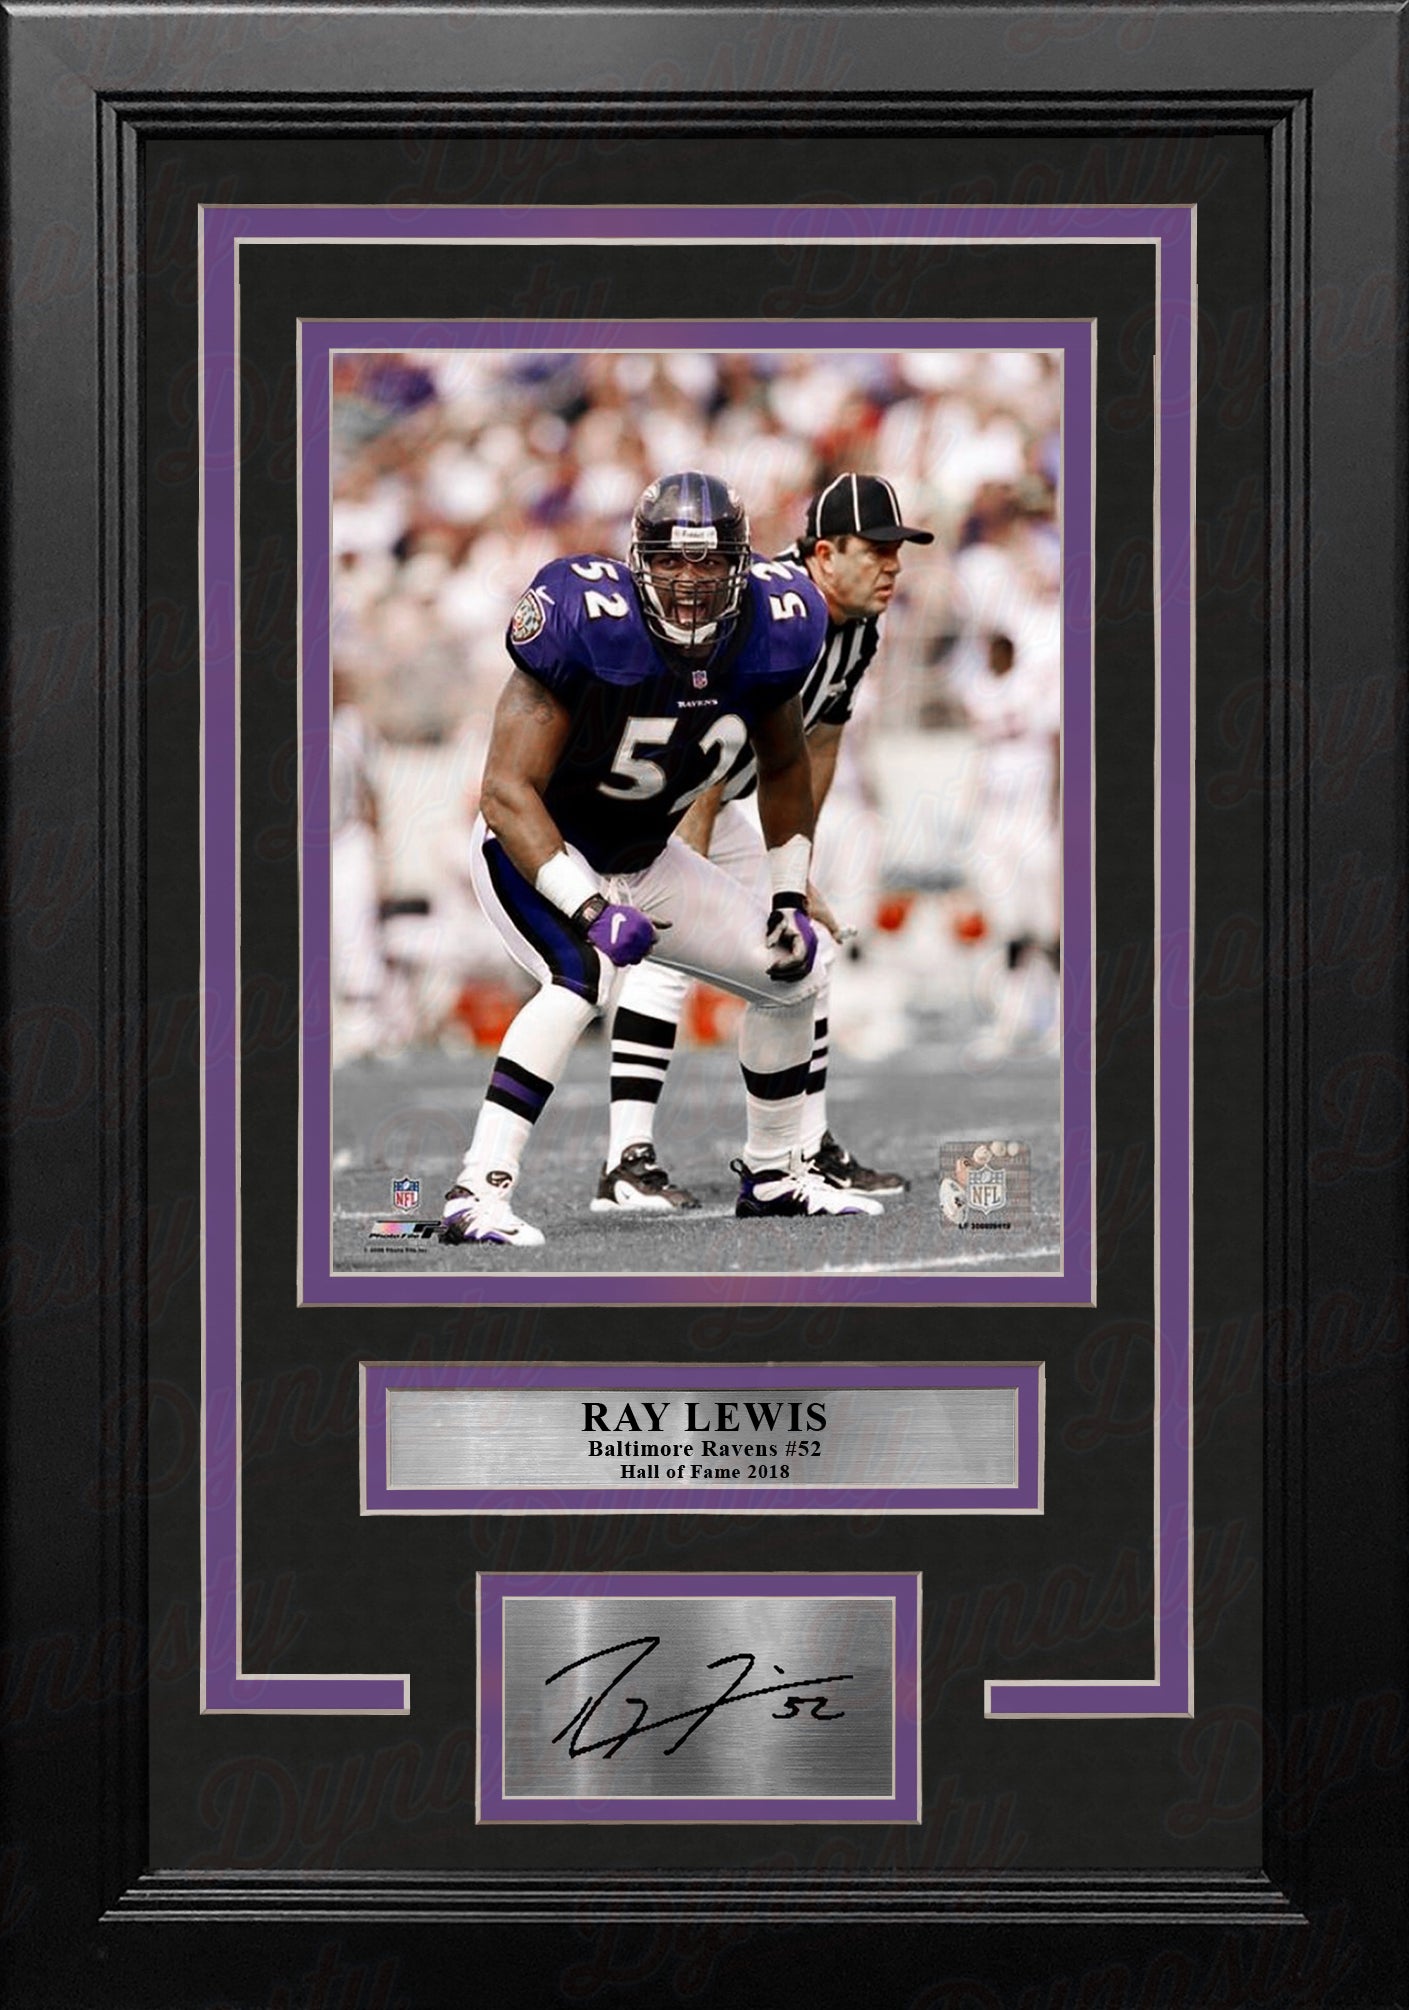 Ray Lewis Flexing on the Field Baltimore Ravens 8x10 Framed Football Photo  with Engraved Autograph - Dynasty Sports & Framing